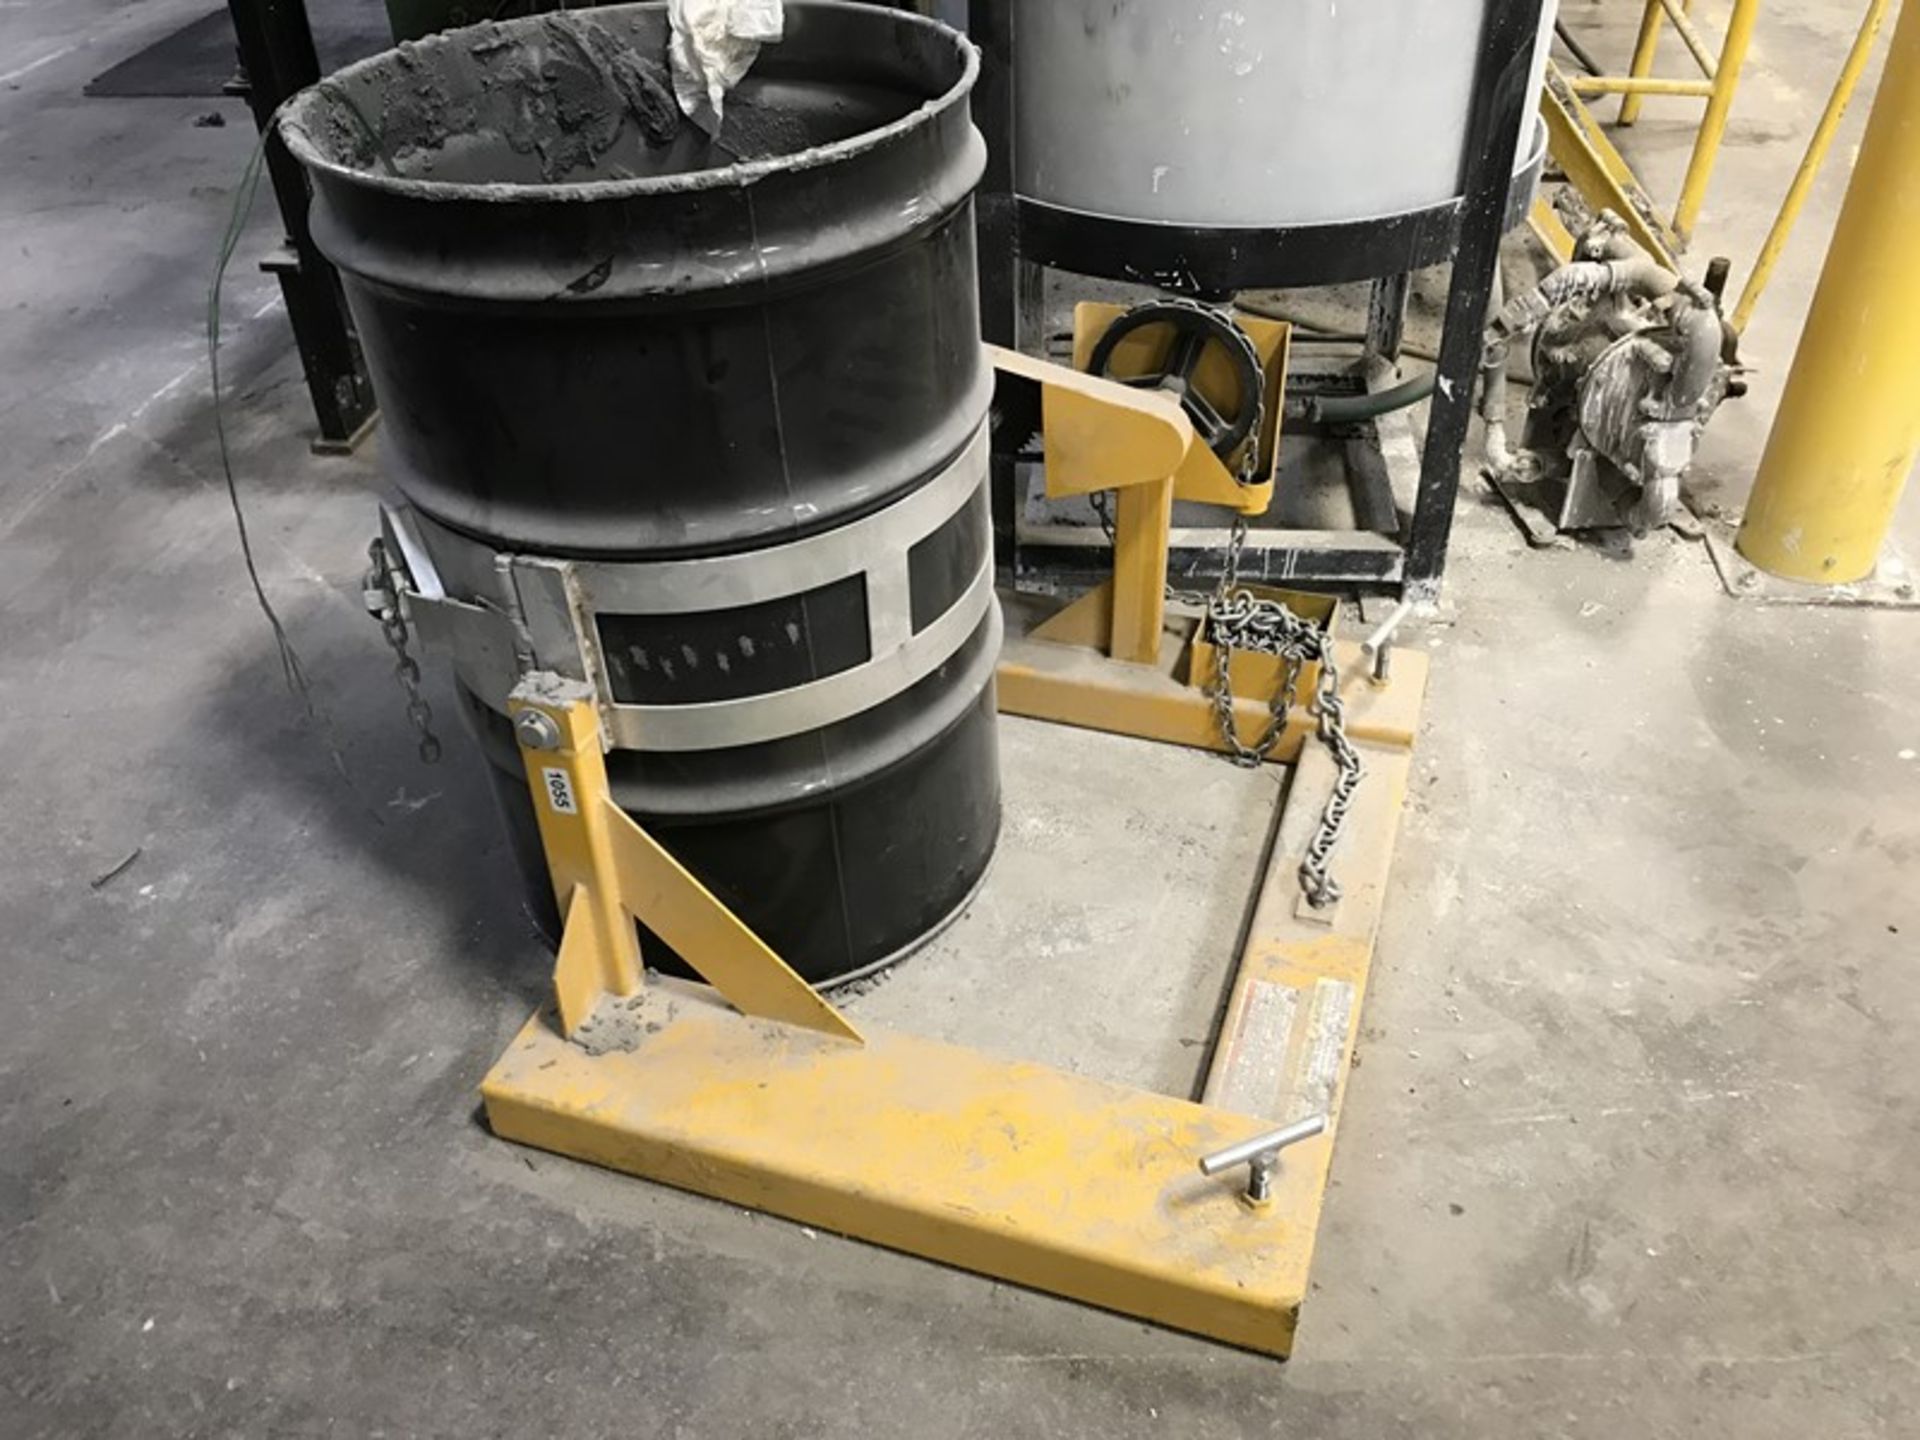 55 gallon drum tilting stand. - Image 4 of 5